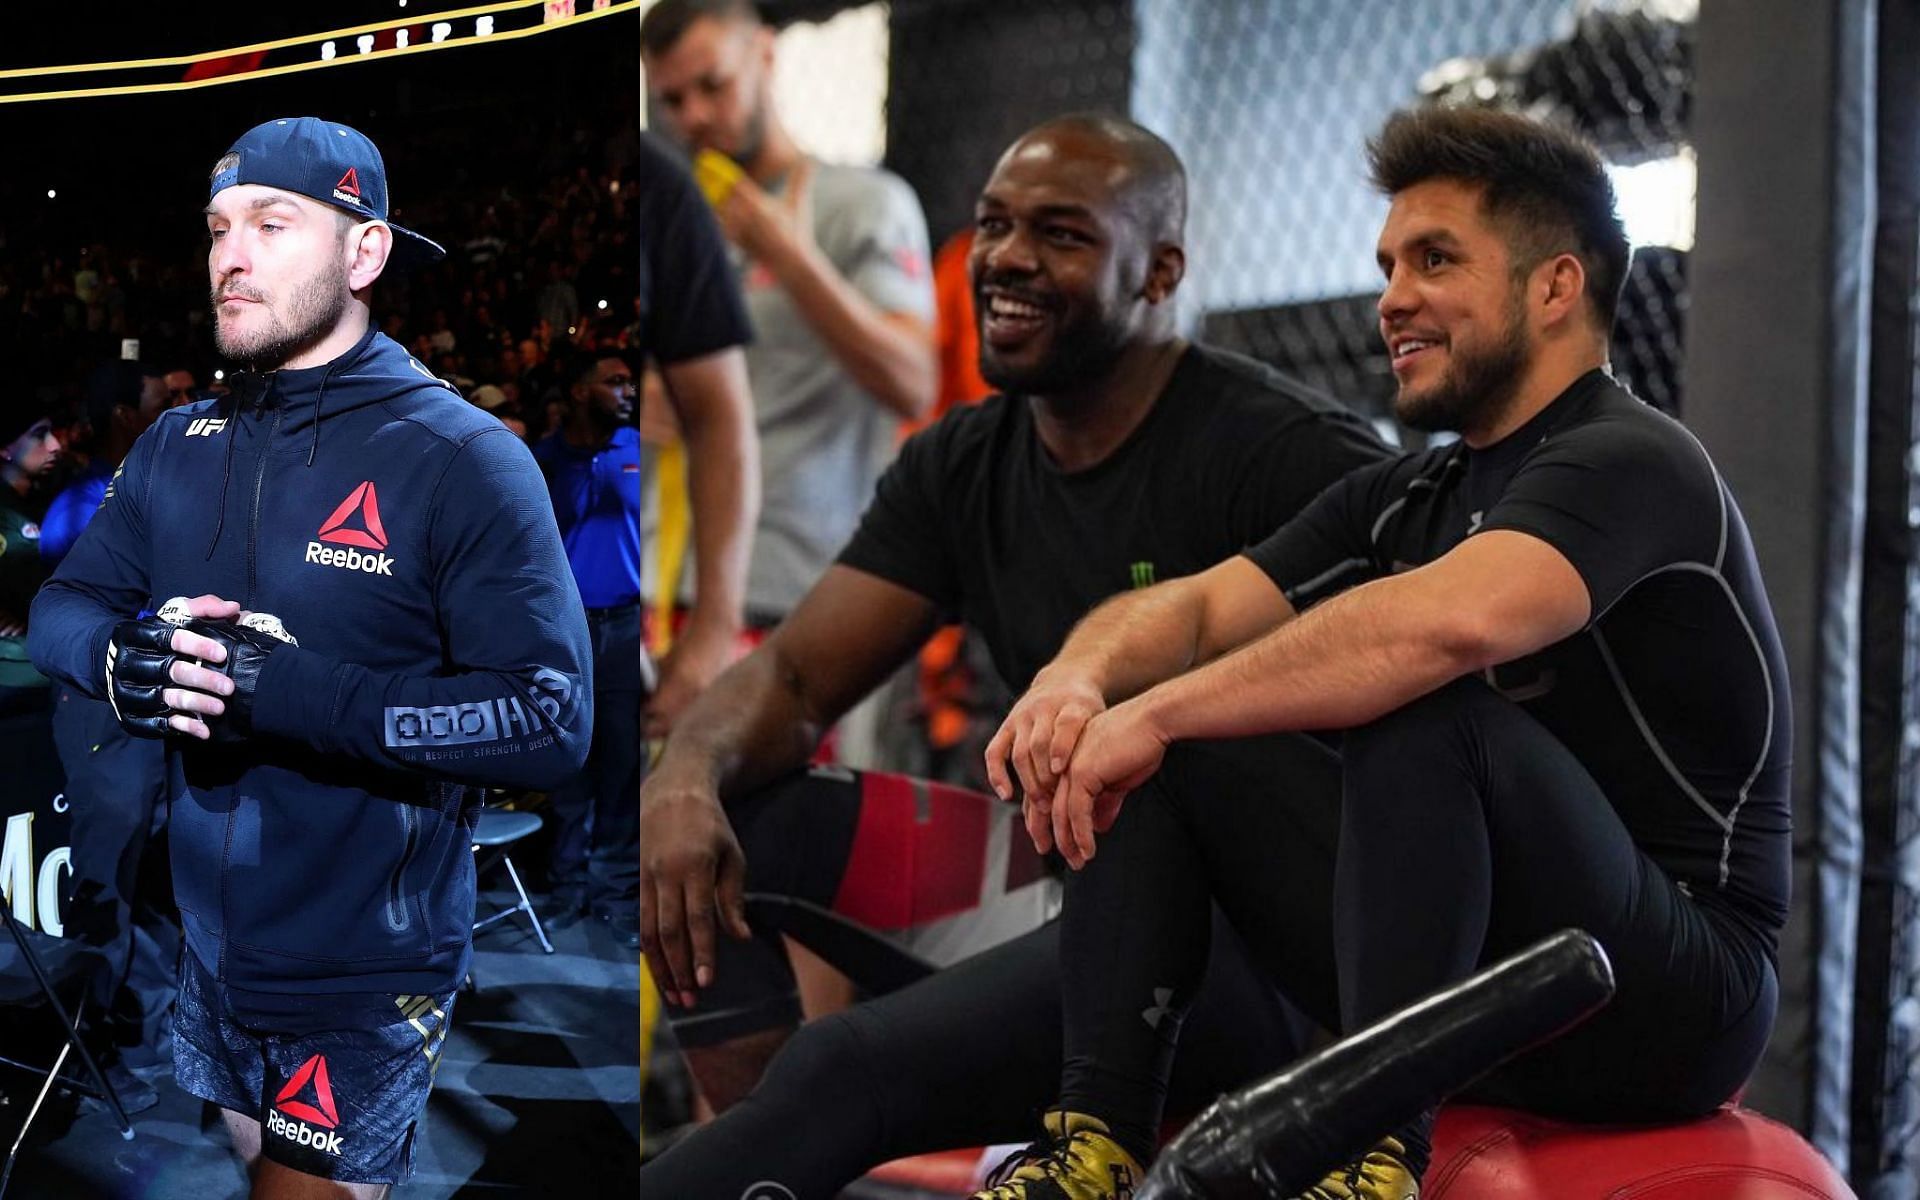 Stipe Miocic (left), Jon Jones and Henry Cejudo (right) [Images courtesy of Getty and @henry_cejudo Instagram]